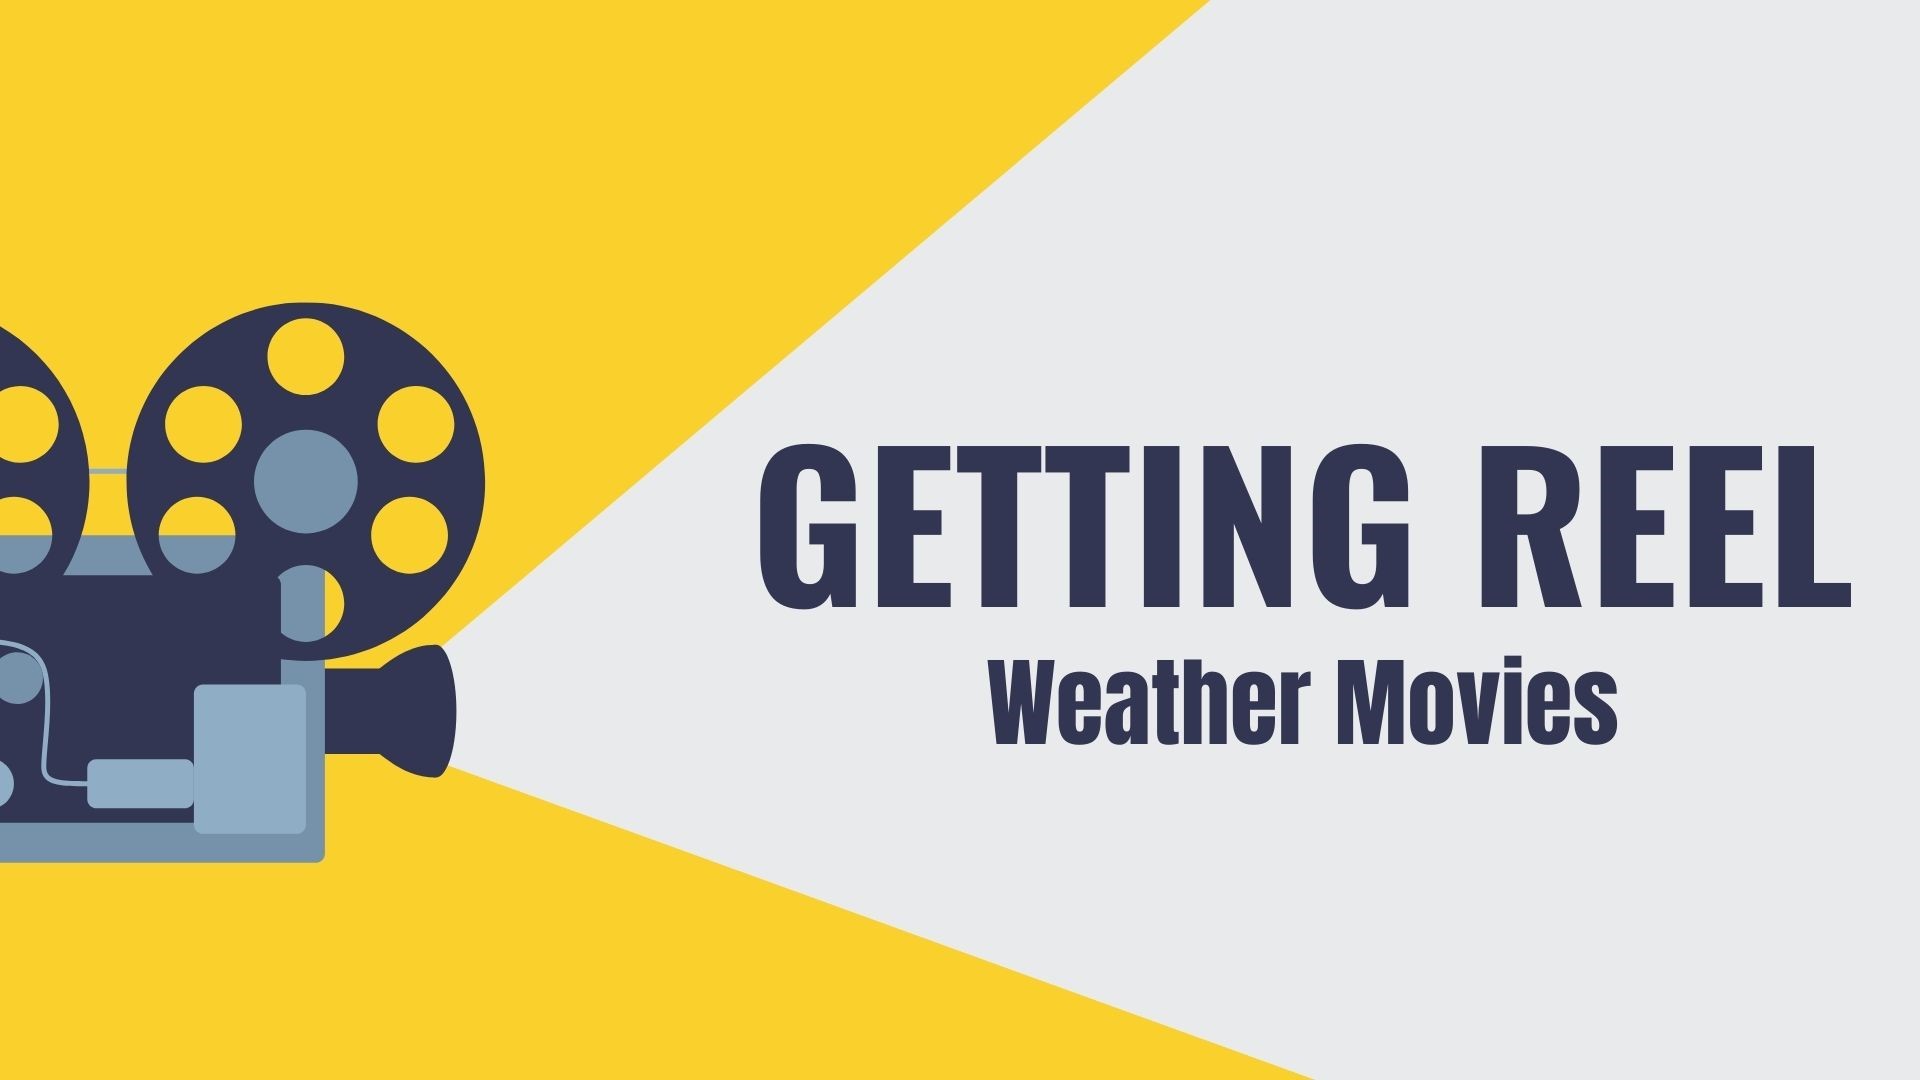 KTHV movie reviewers discuss their favorite weather movies to watch. From cheesy to fun, they share which ones are worth your time, and 'Twister' is included.